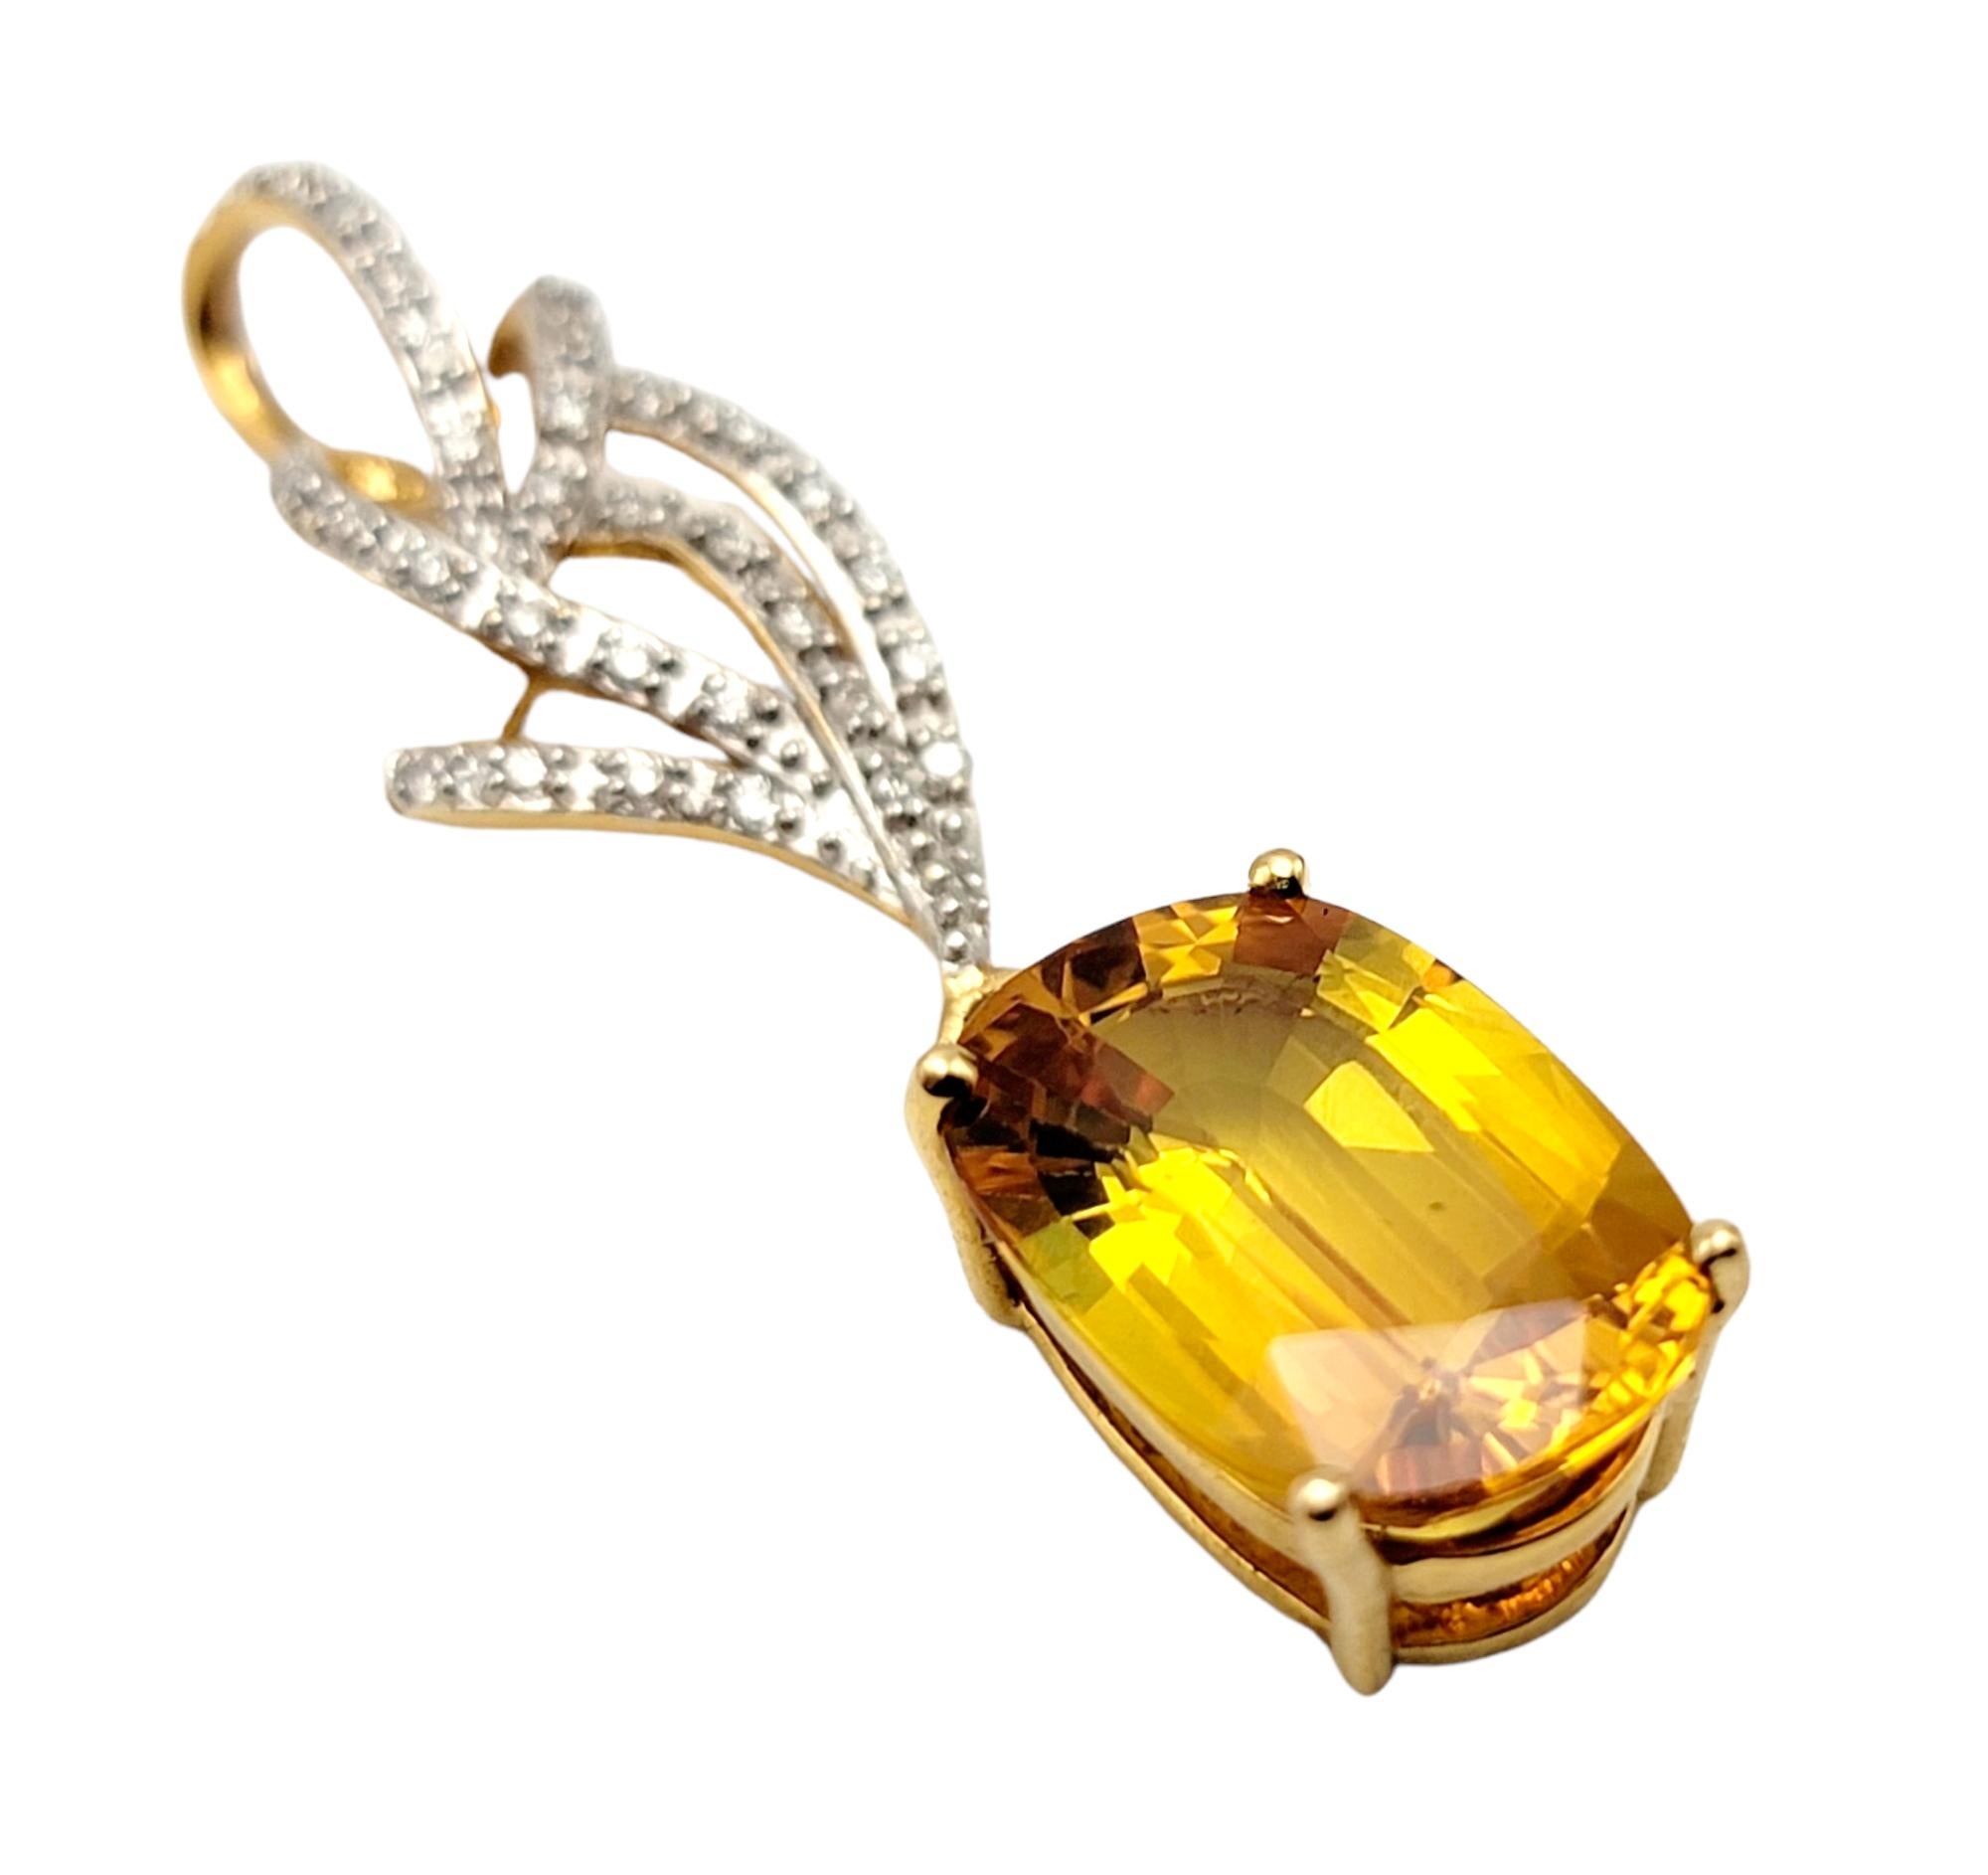 Elegant vertical pendant featuring a large yellow sapphire and sparkling pave diamonds. The stunning 4 prong set oval mixed cut yellow sapphire pops against the warm yellow gold setting, while the twisted 'flame' of natural white diamonds really